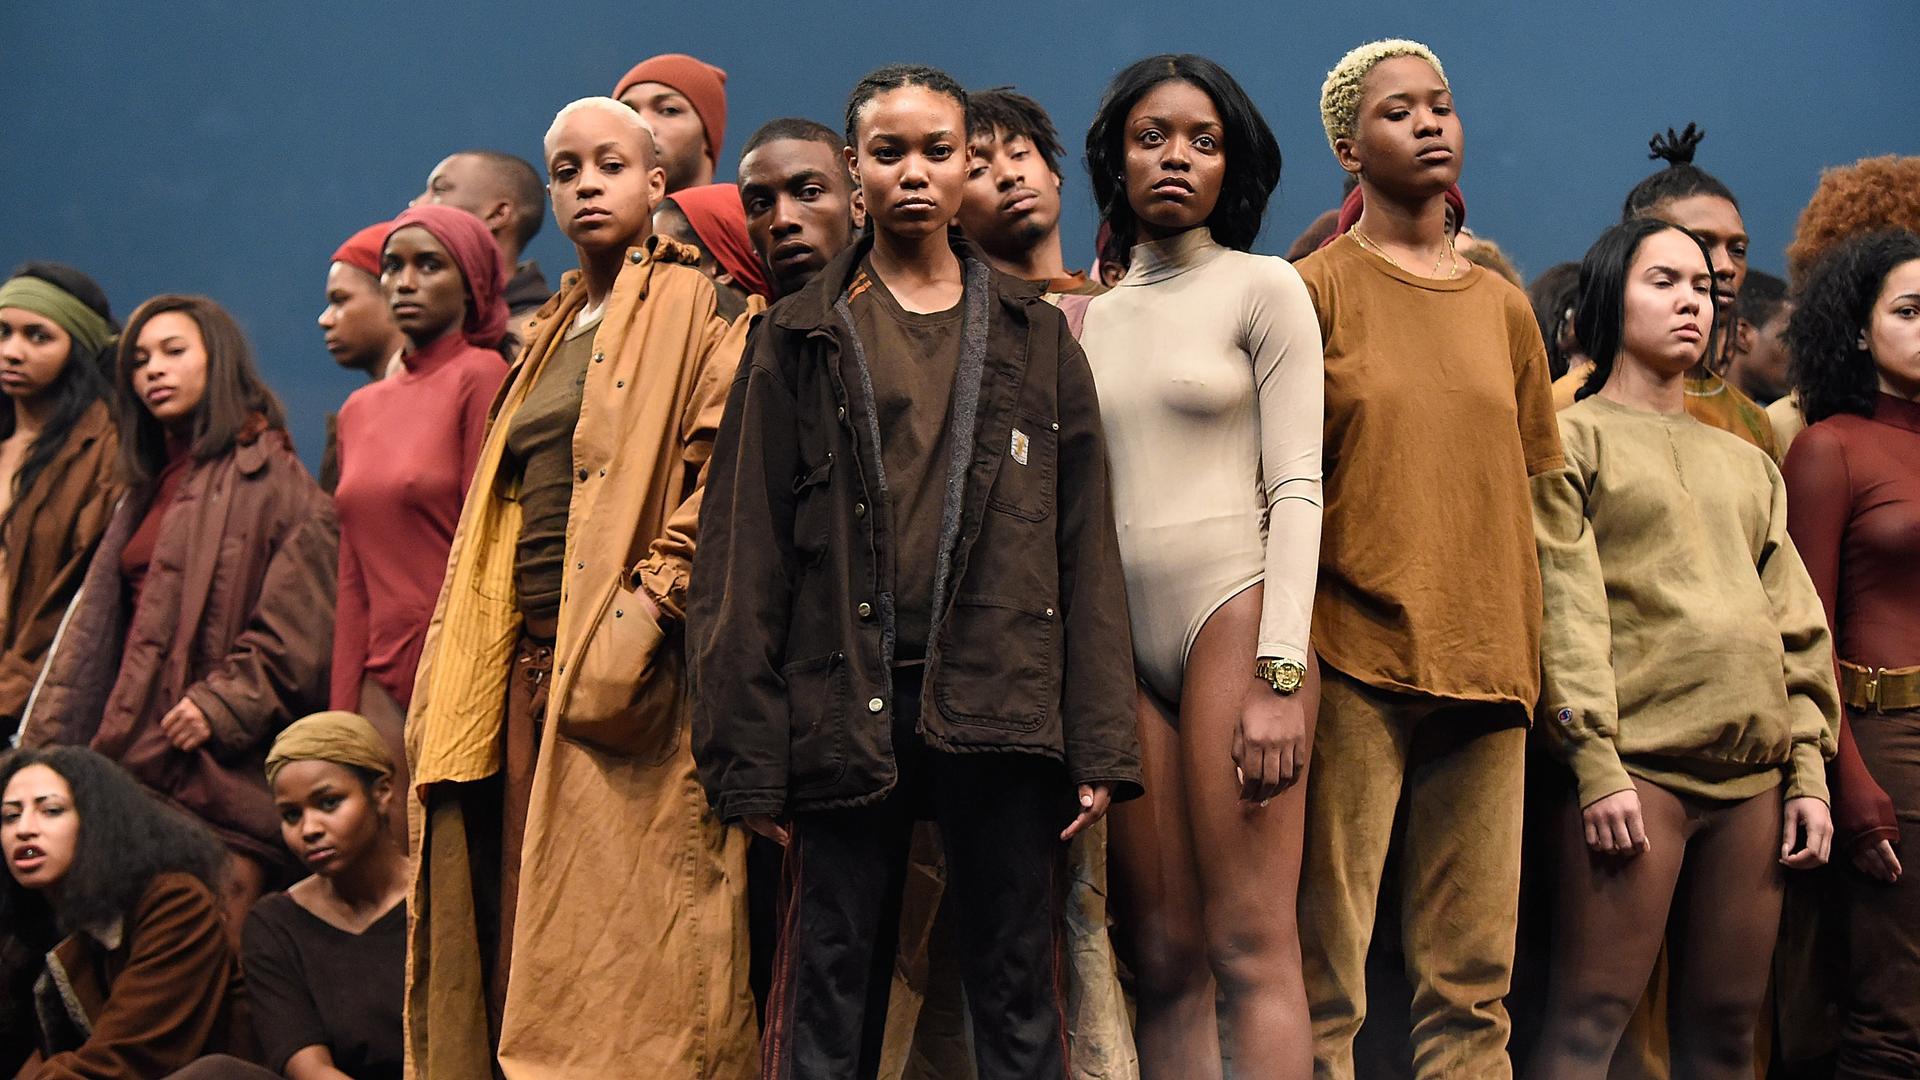 Models pose during Kanye West Yeezy Season 3 at Madison Square Garden on February 11, 2016 in New York City.